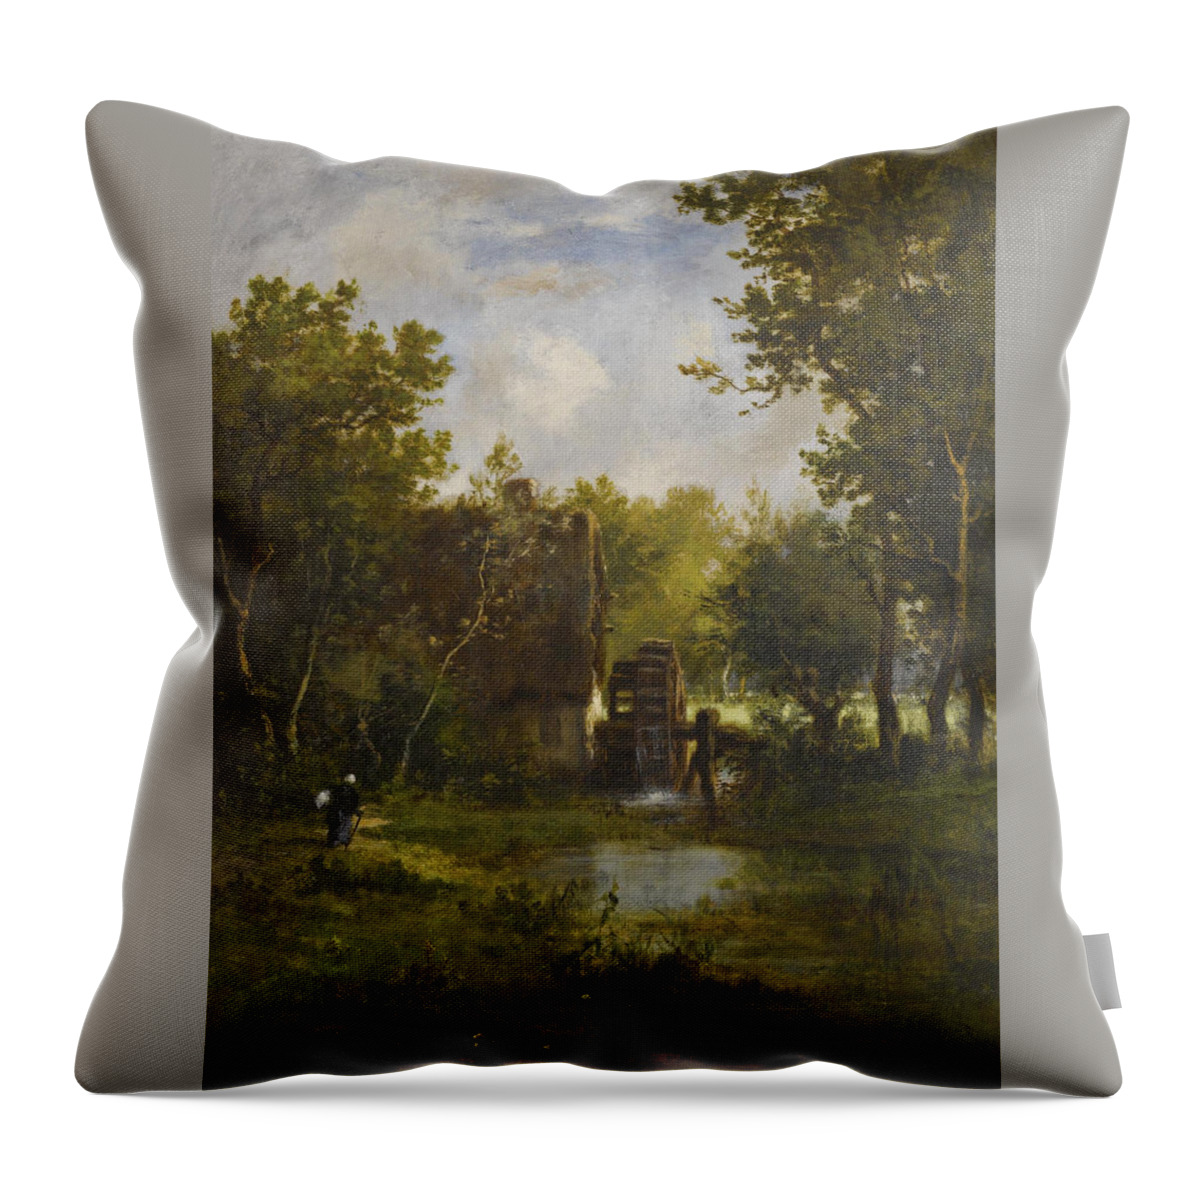 Leon Richet Throw Pillow featuring the painting The Old Water Mill by Leon Richet